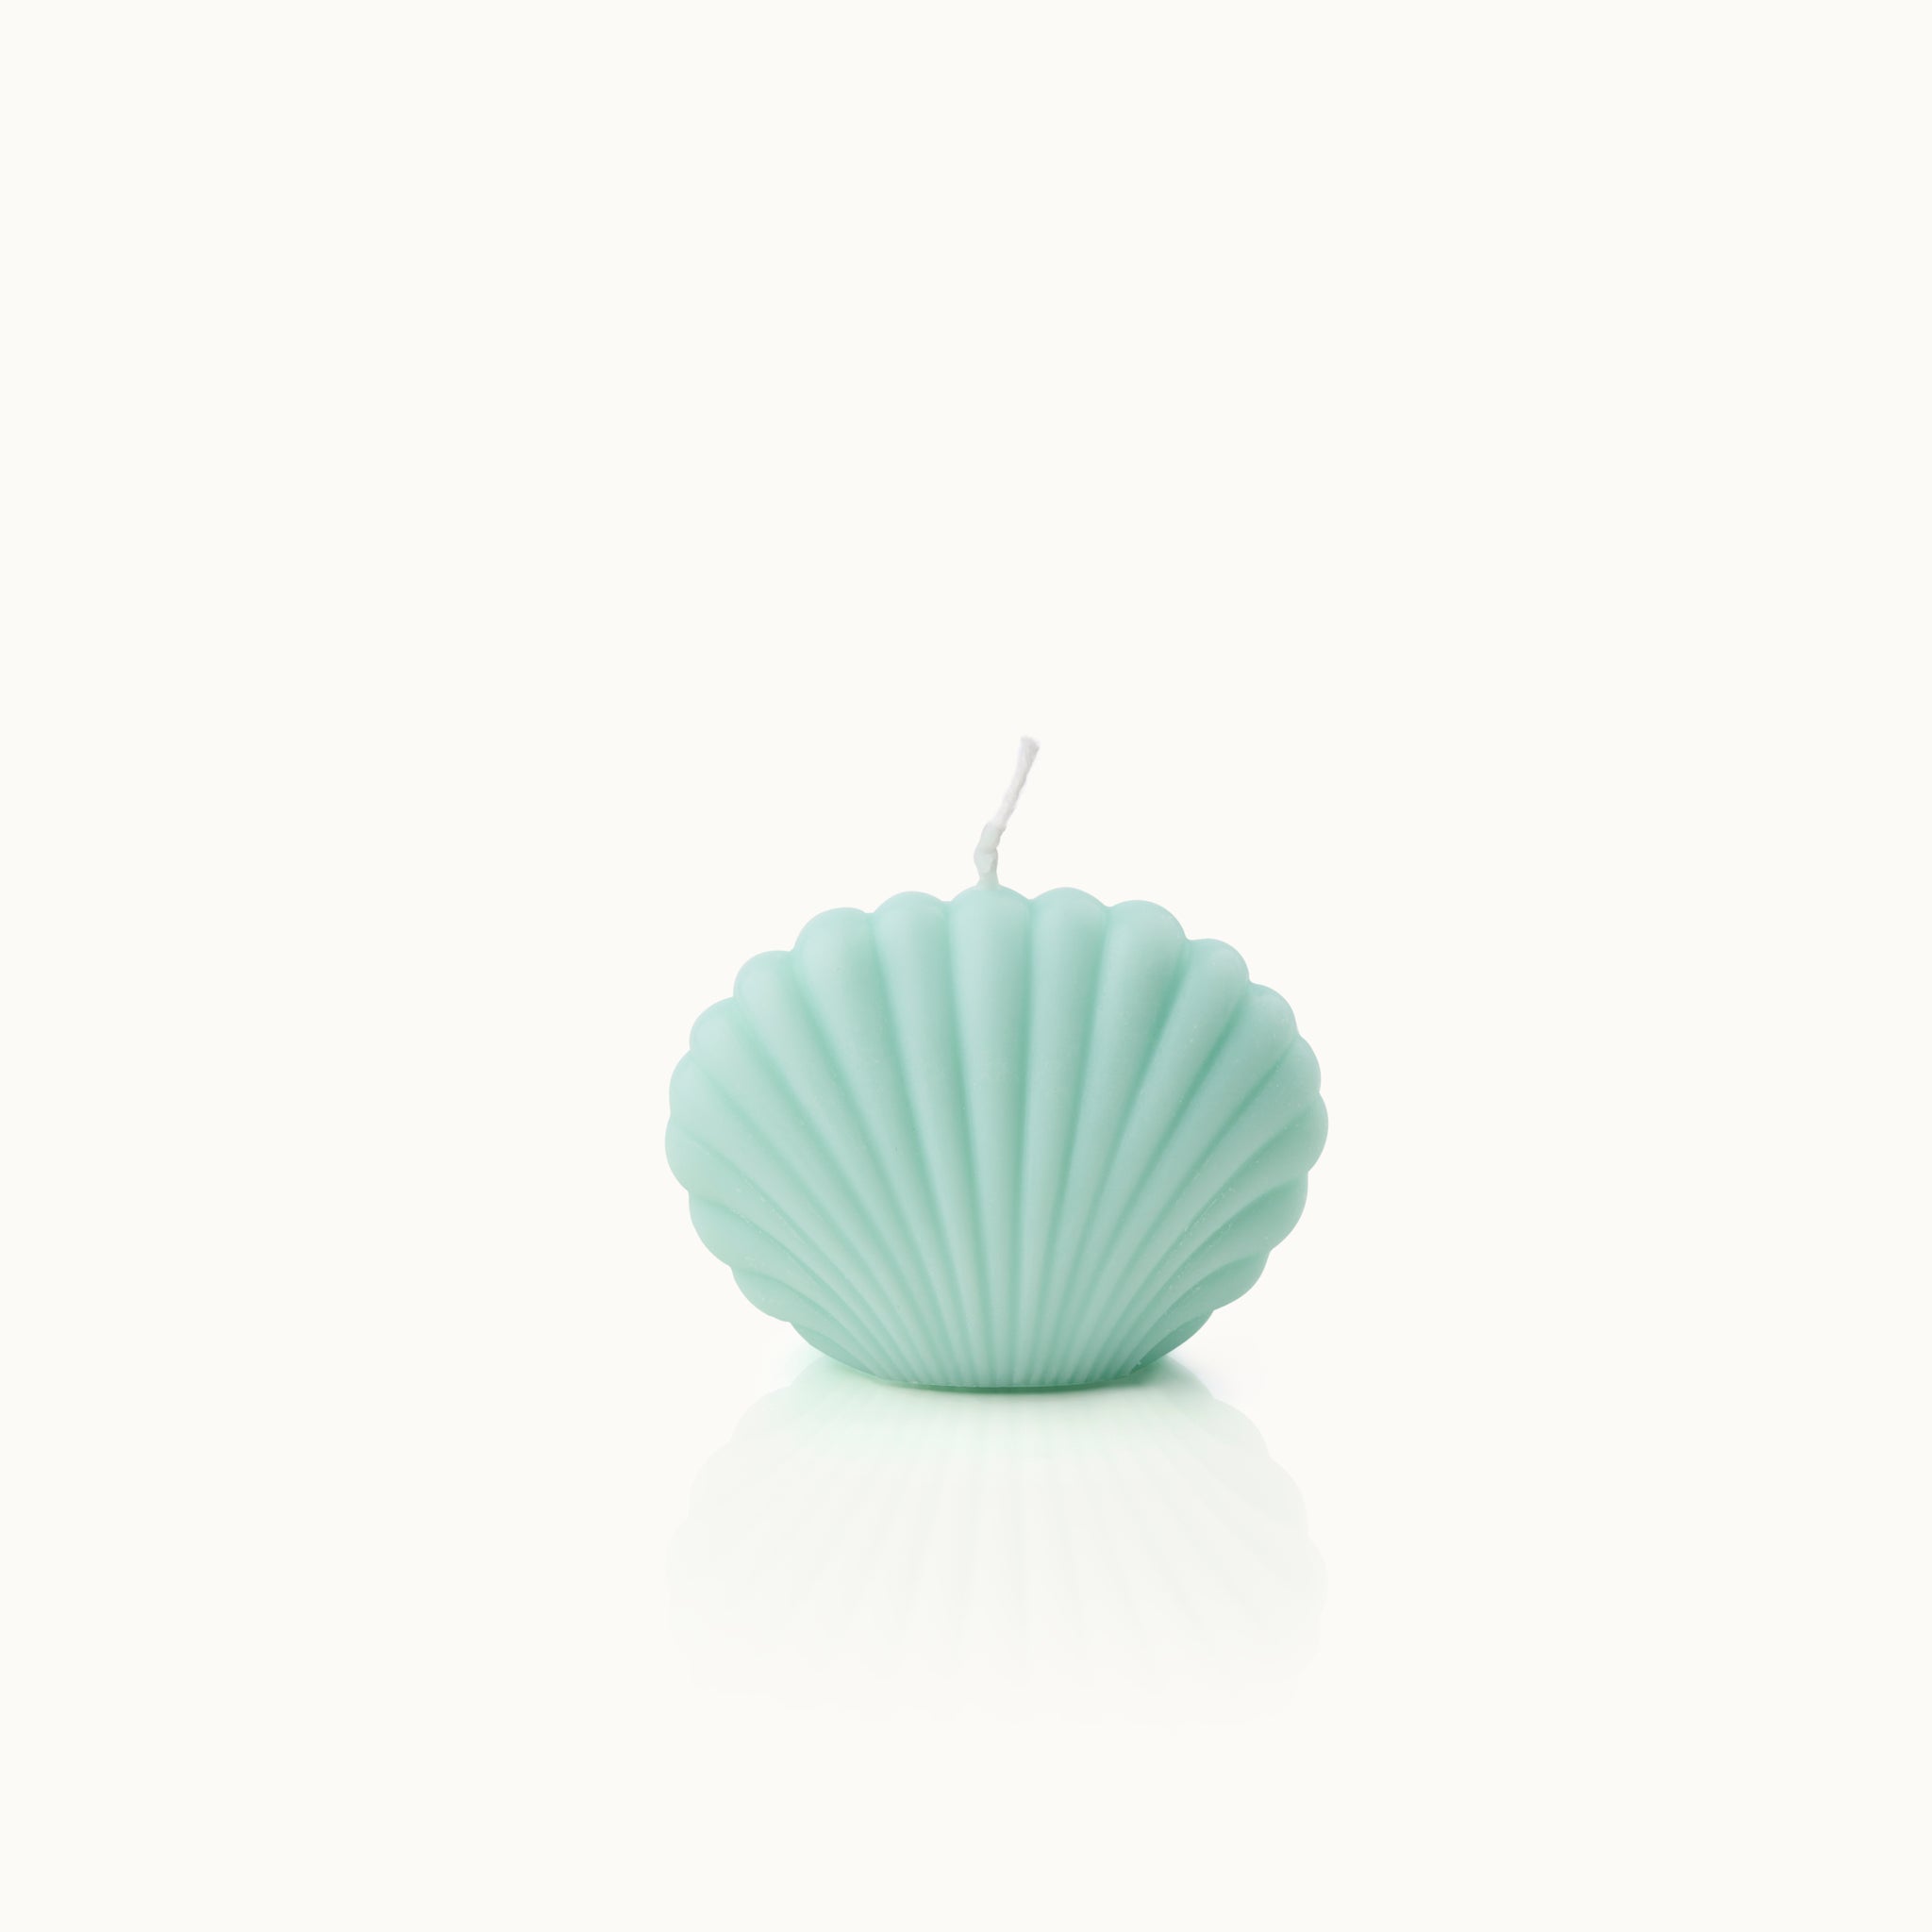  Candle in shell shape small turquoise